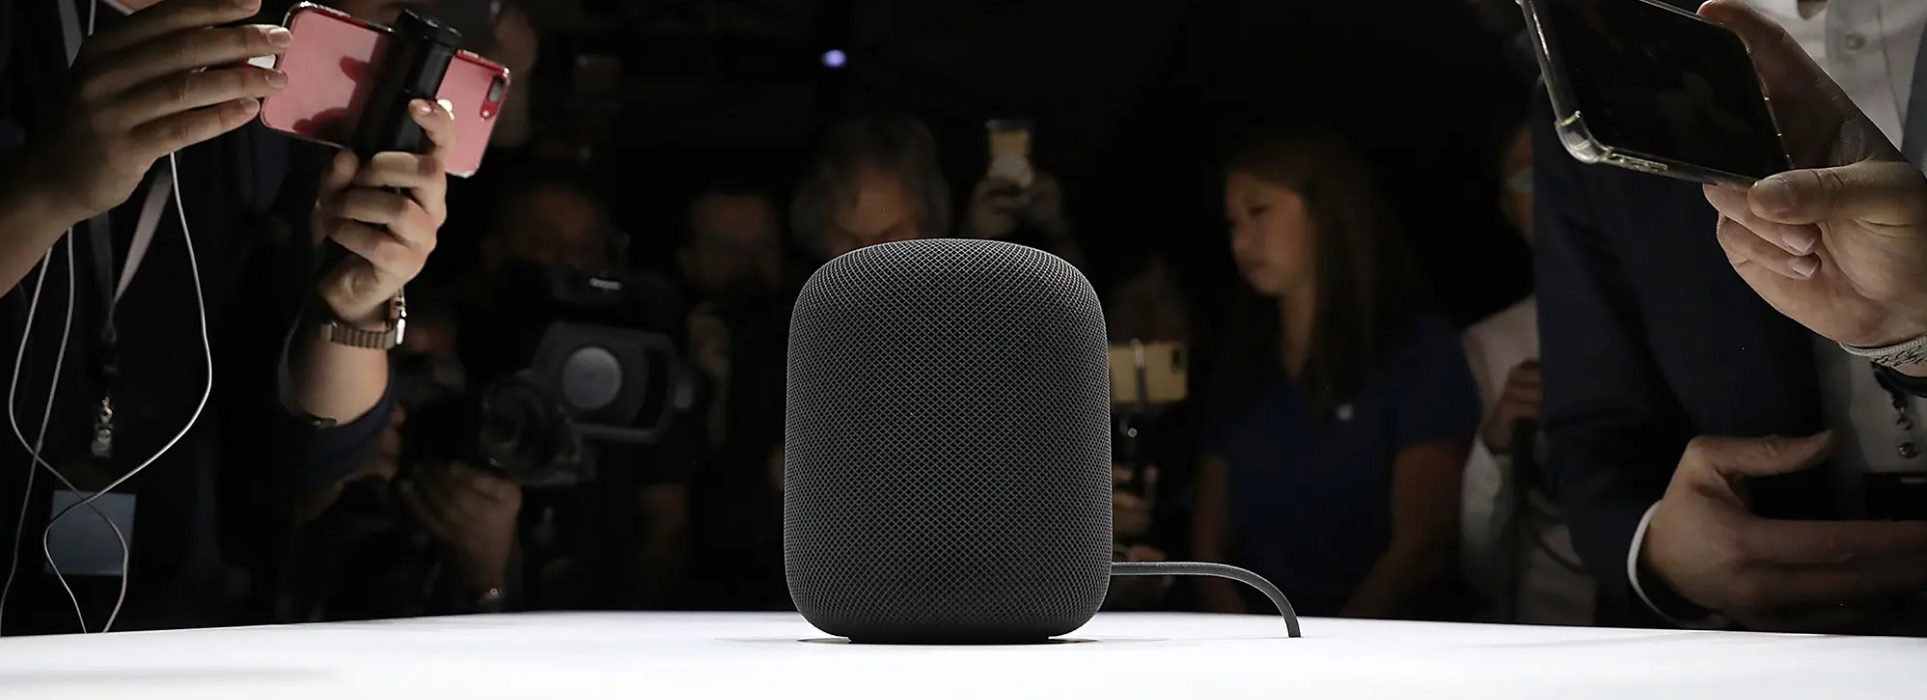 How to Connect HomePod to Bluetooth and Use it?